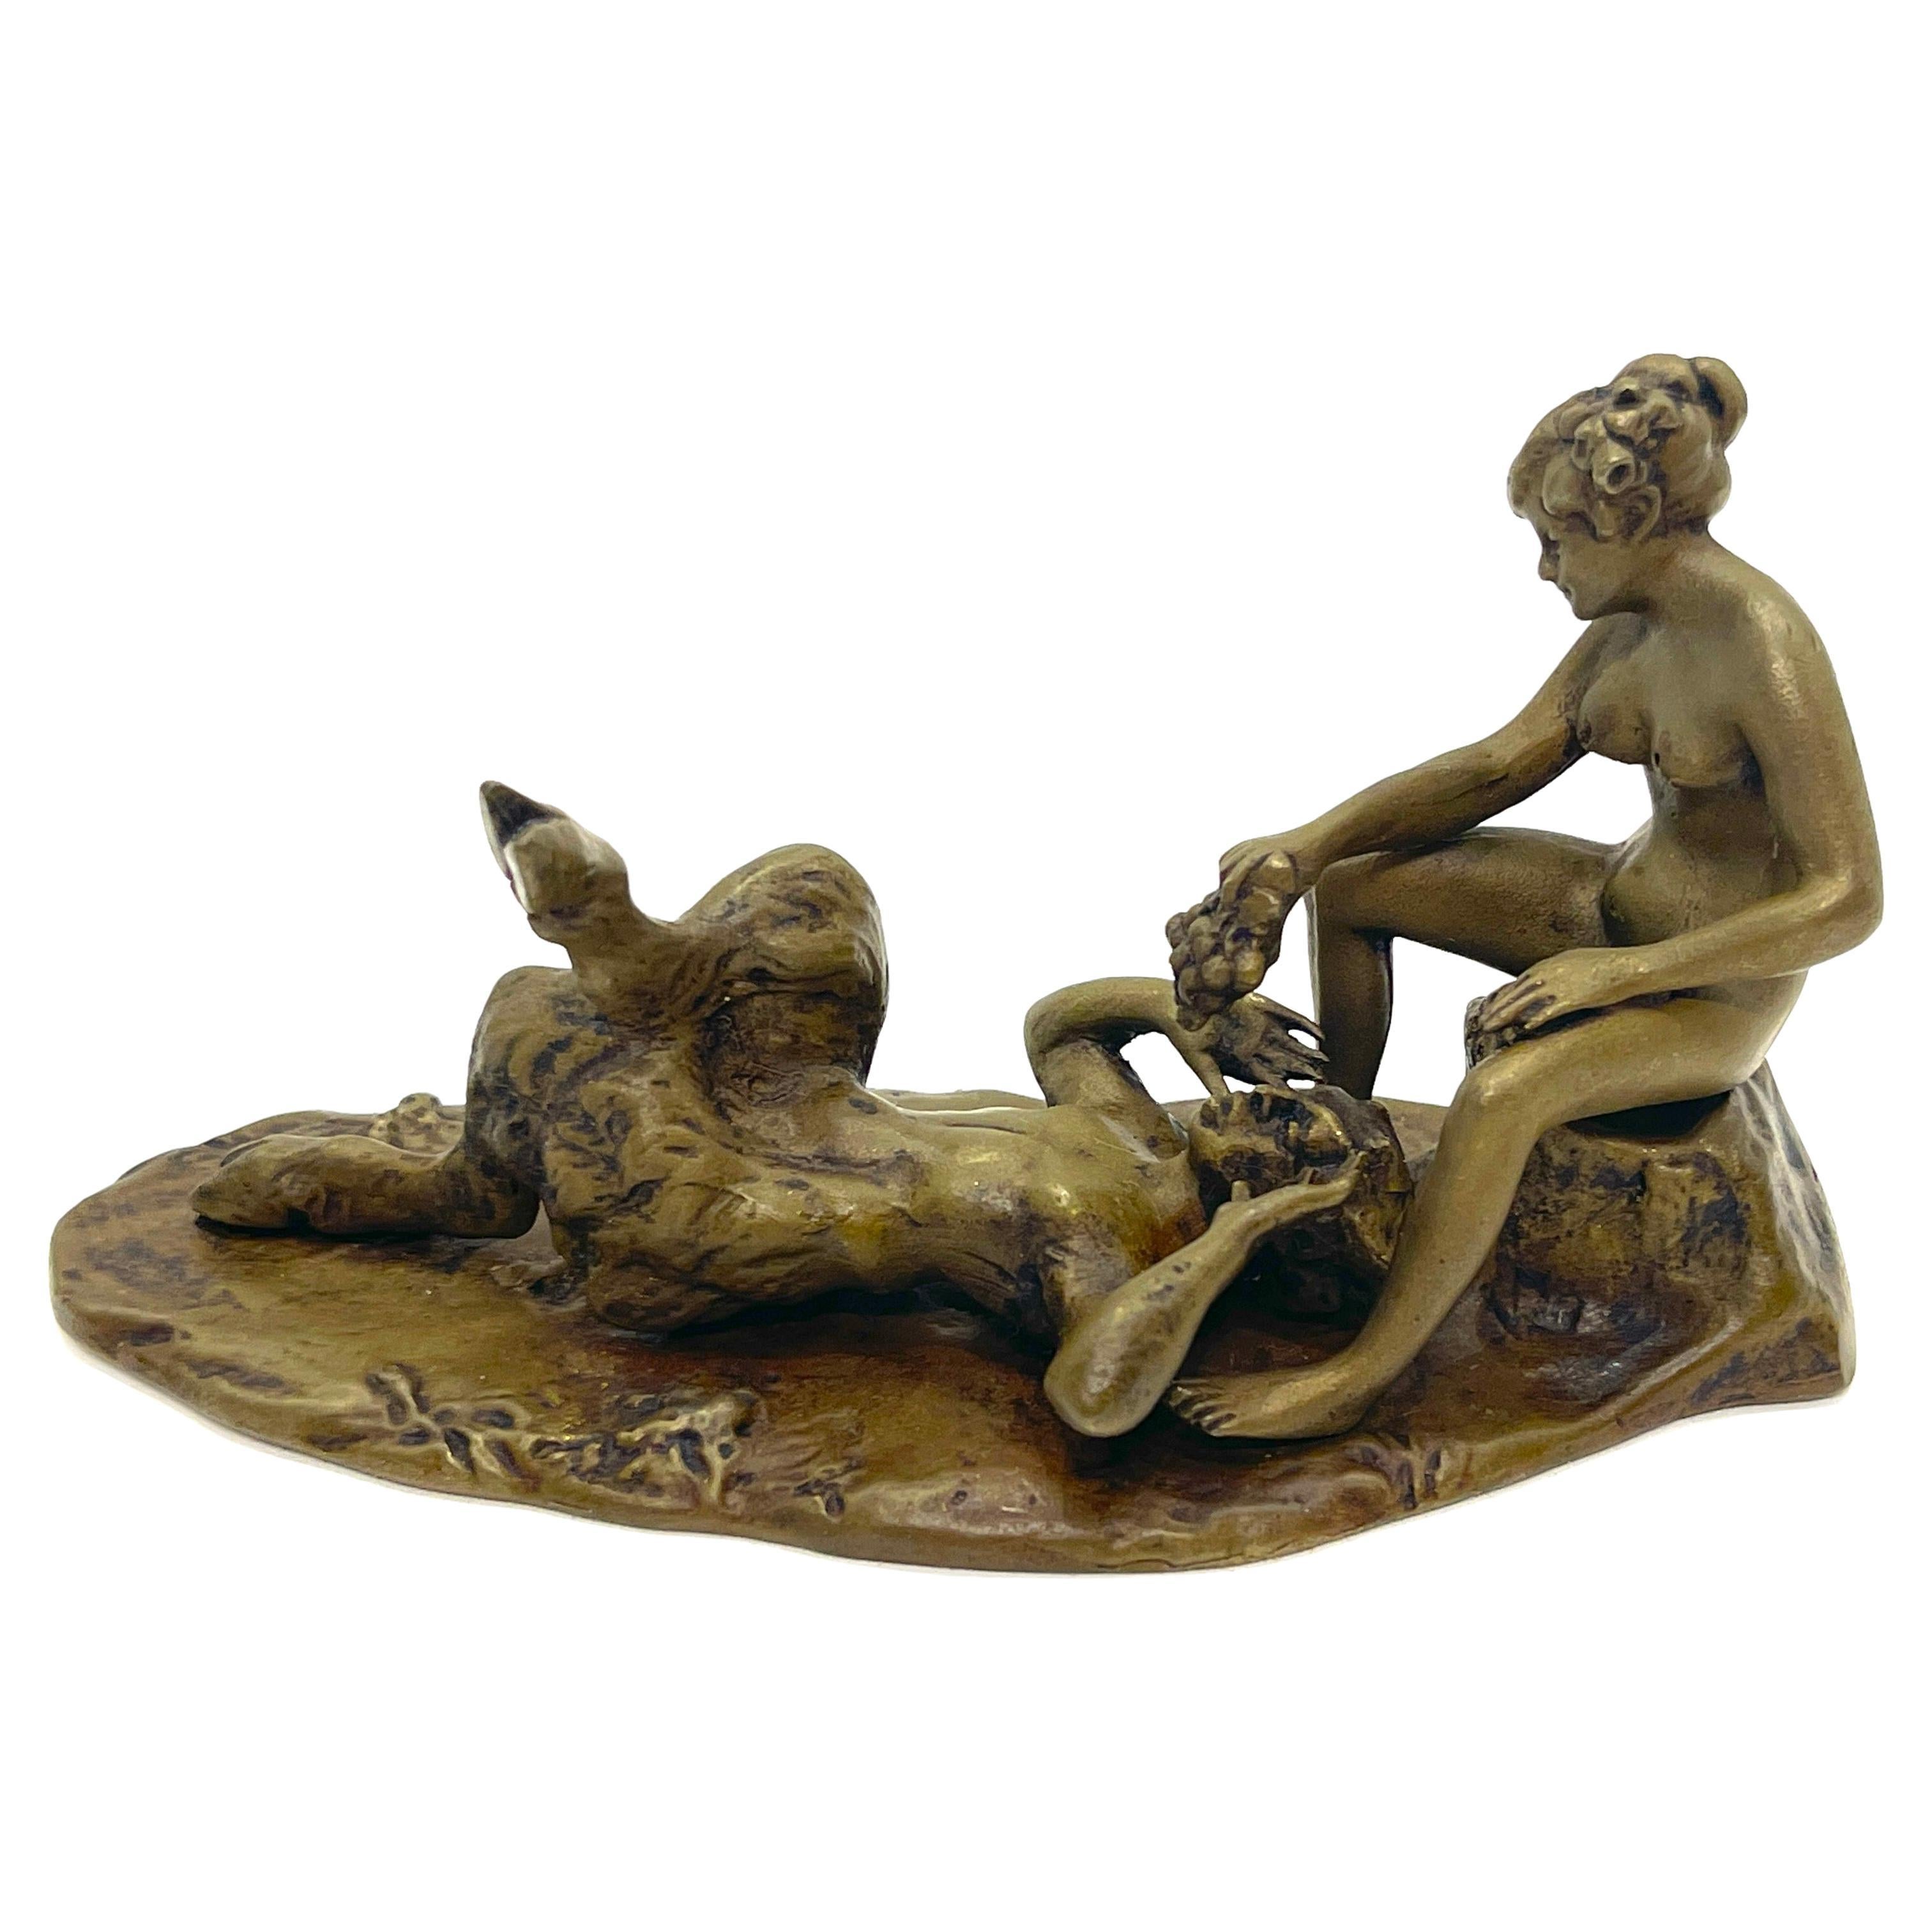 Austrian Erotic Bronze Nymph & Satyr, Style of Bergman 
Austria, circa 1900s

A well executed two piece bronze, that presents the naked female figure feeding the reclining satyr grapes. The adult option to lifting the nymph and setting her on